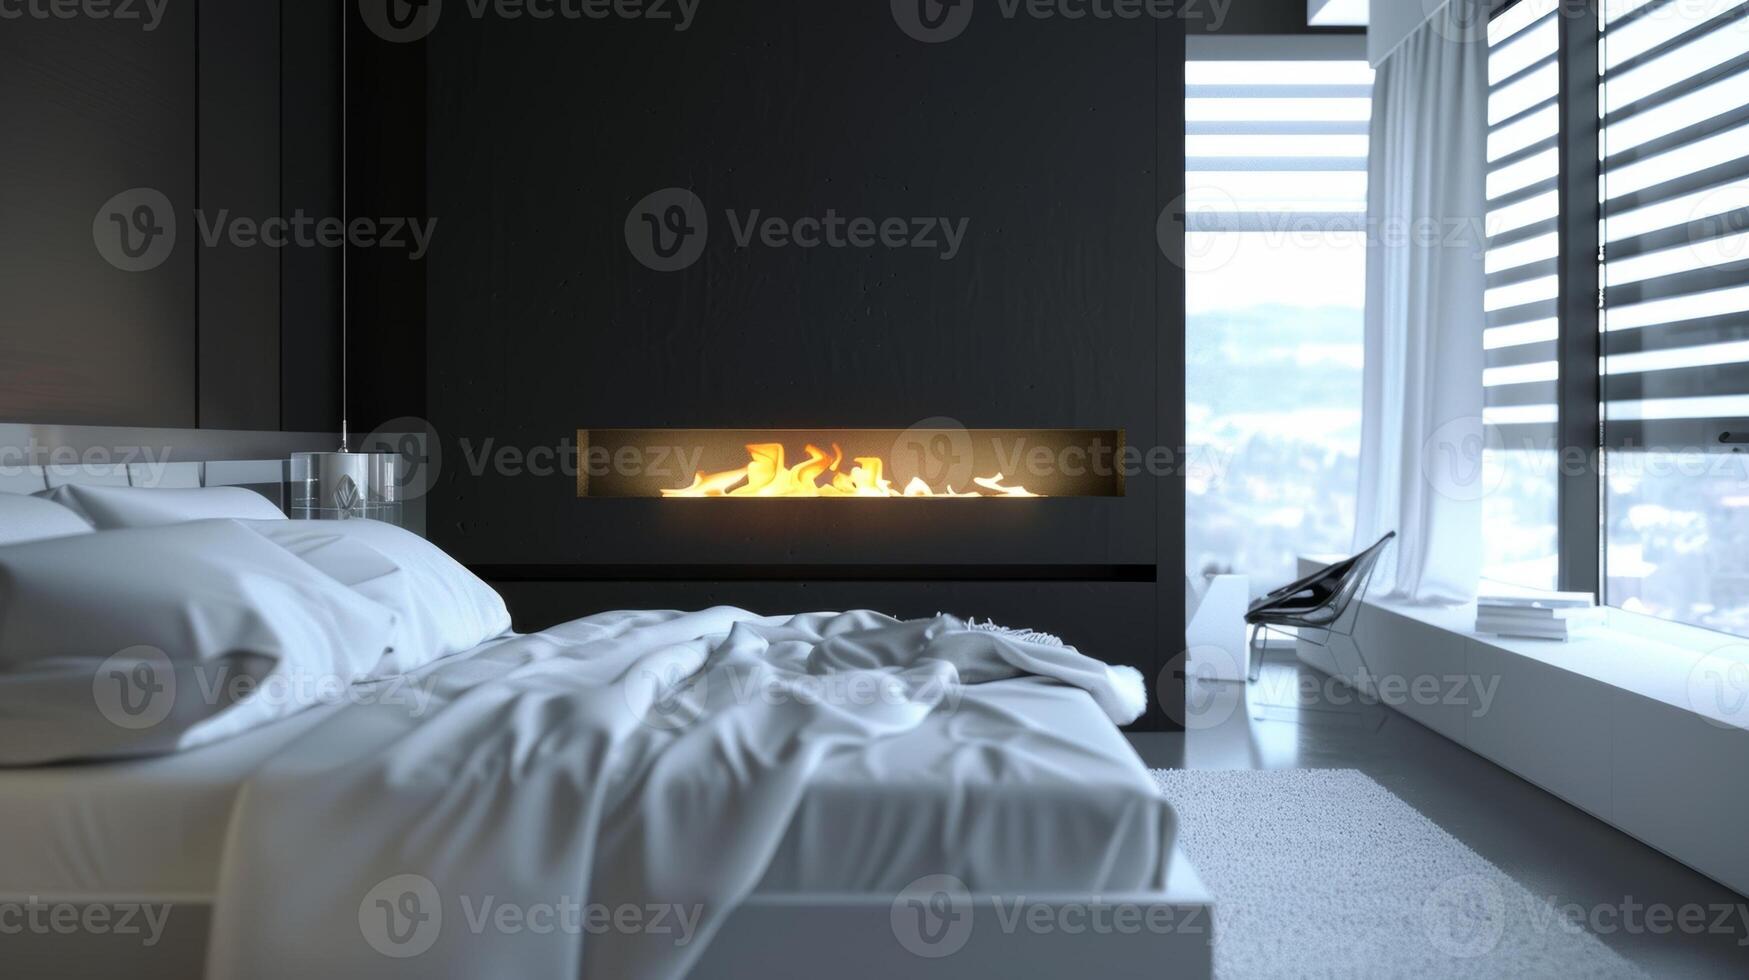 A sleek minimalist bedroom with a stunning wallmounted bioethanol fireplace adding both warmth and ambiance to the space. 2d flat cartoon photo